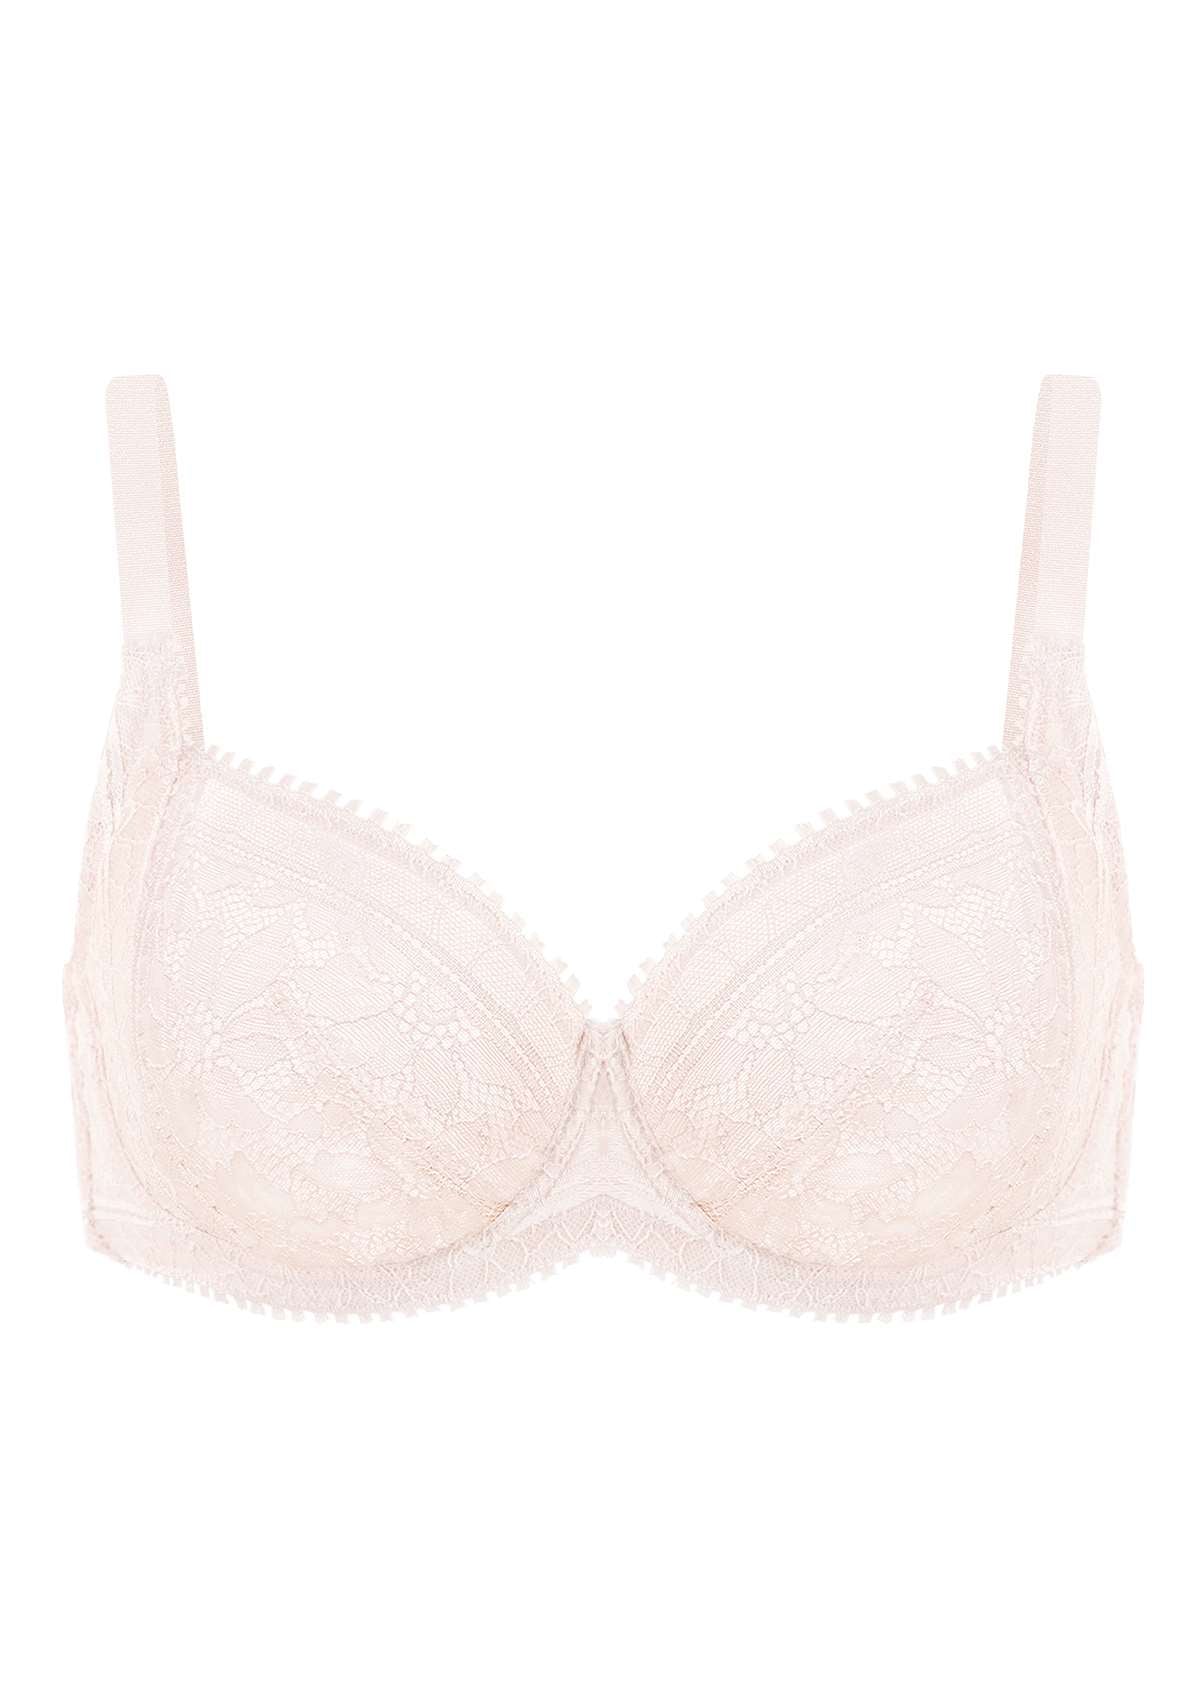 HSIA Silene Floral Delicate Unlined Lace Soft Cup Uplift Bra - Champagne / 36 / DDD/F